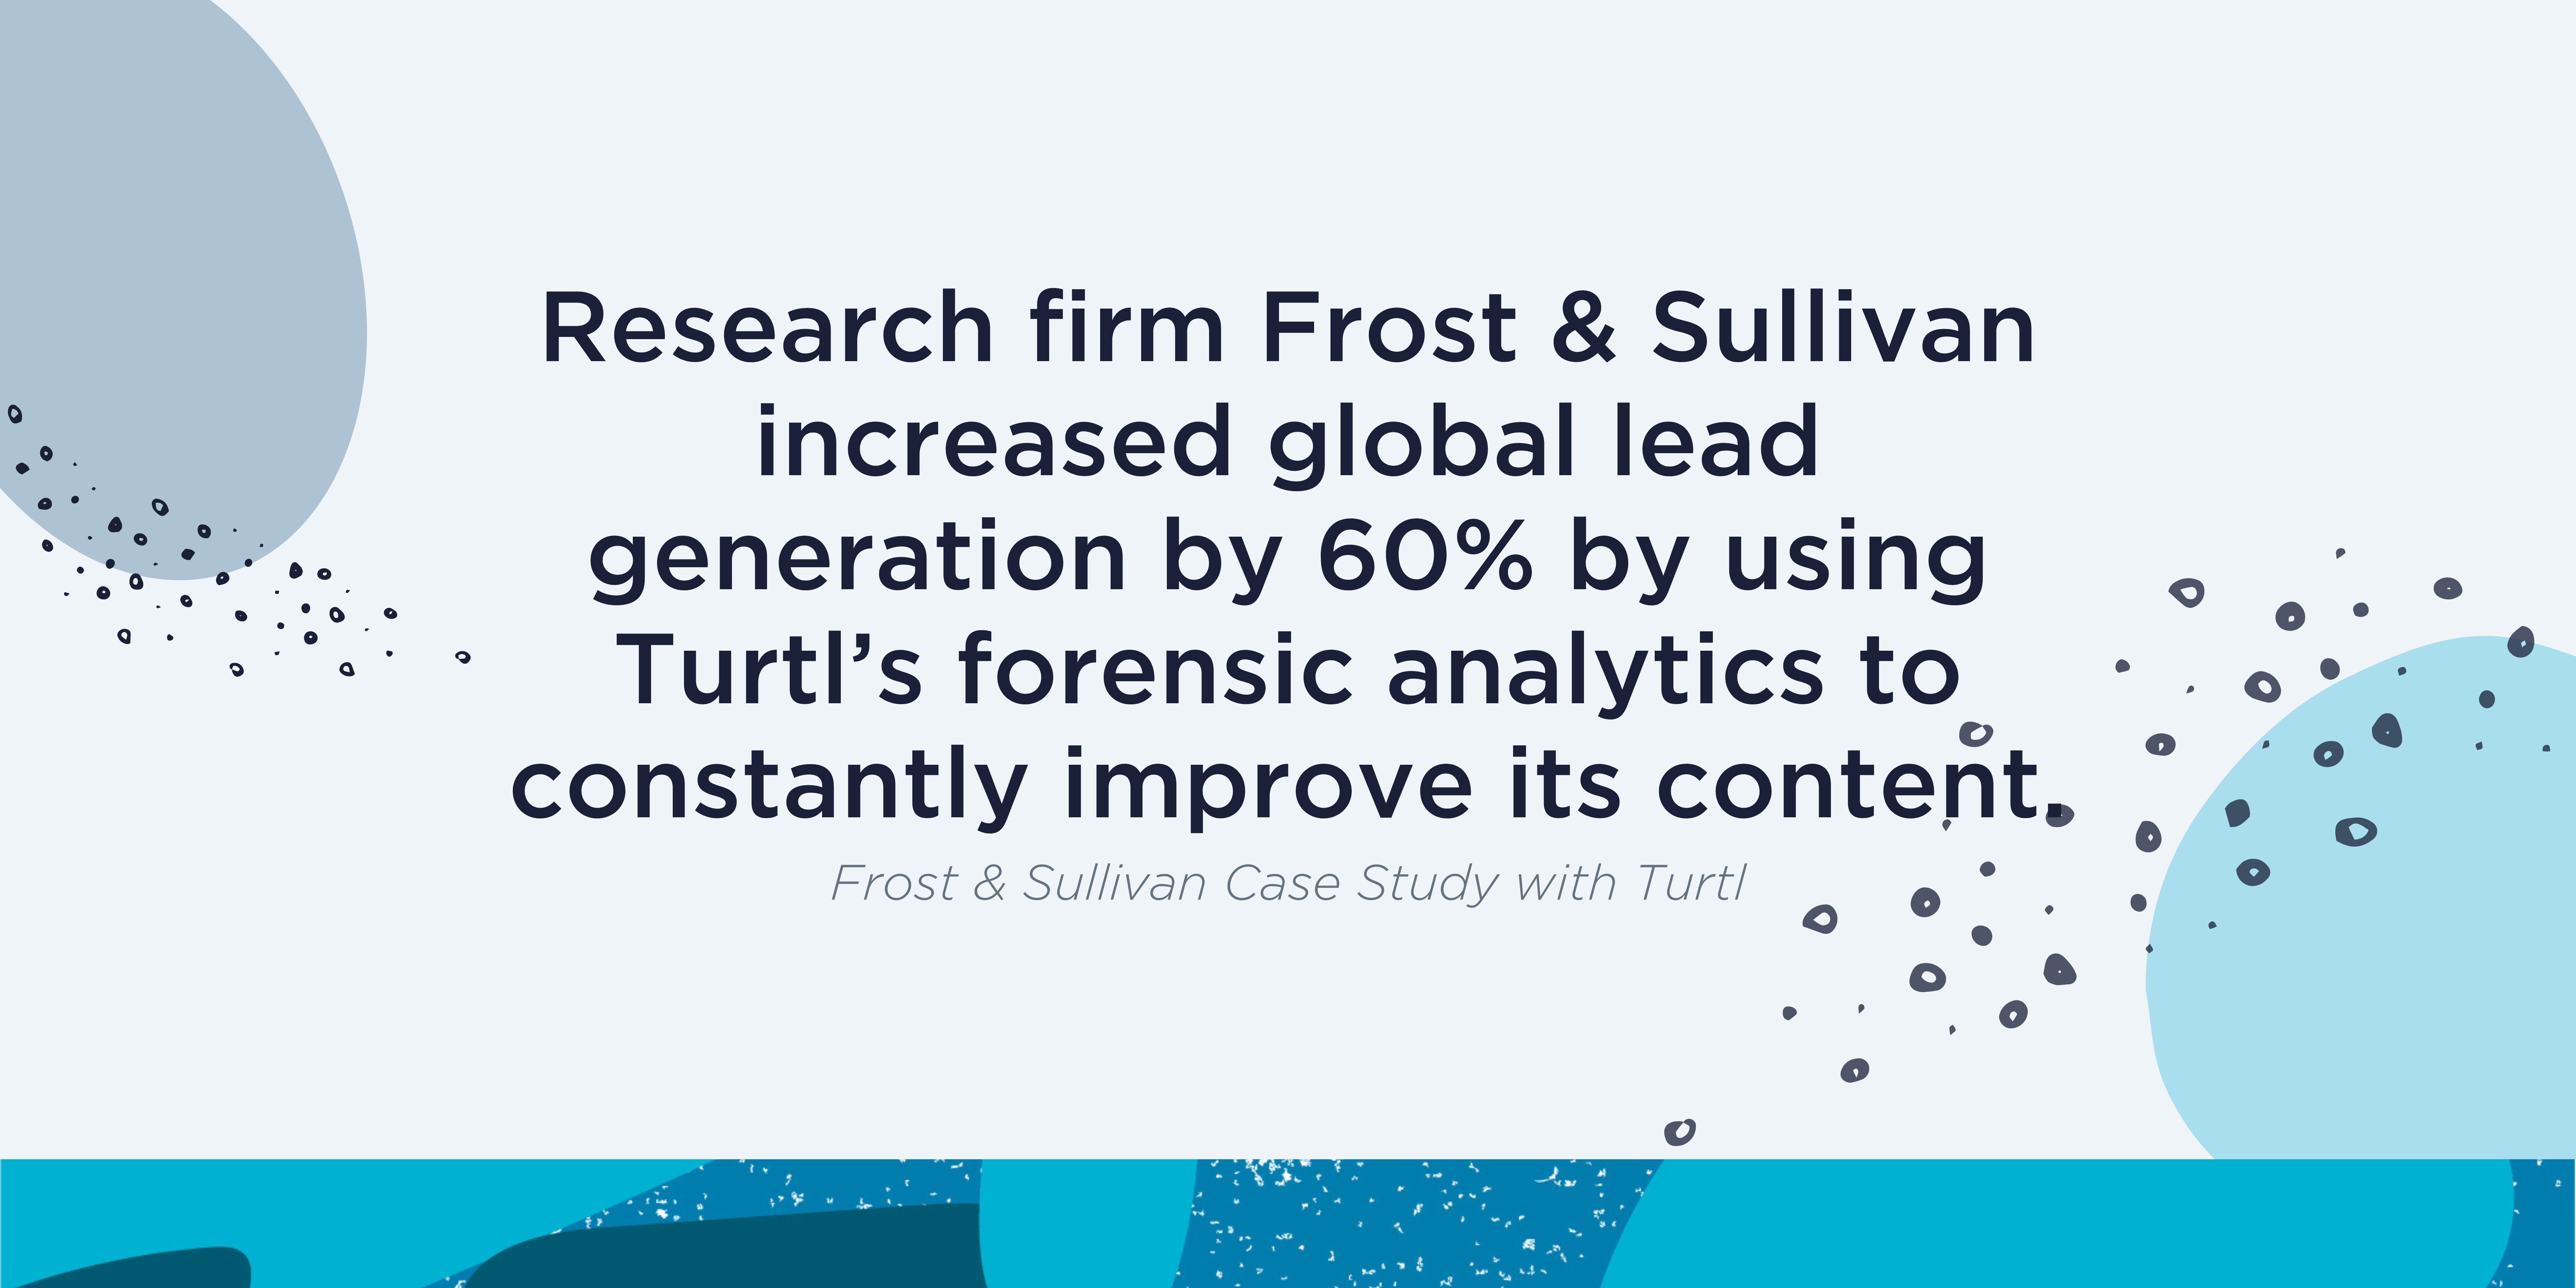 Frost & Sullivan used Turtl's analytics to increase global lead generation by 60%